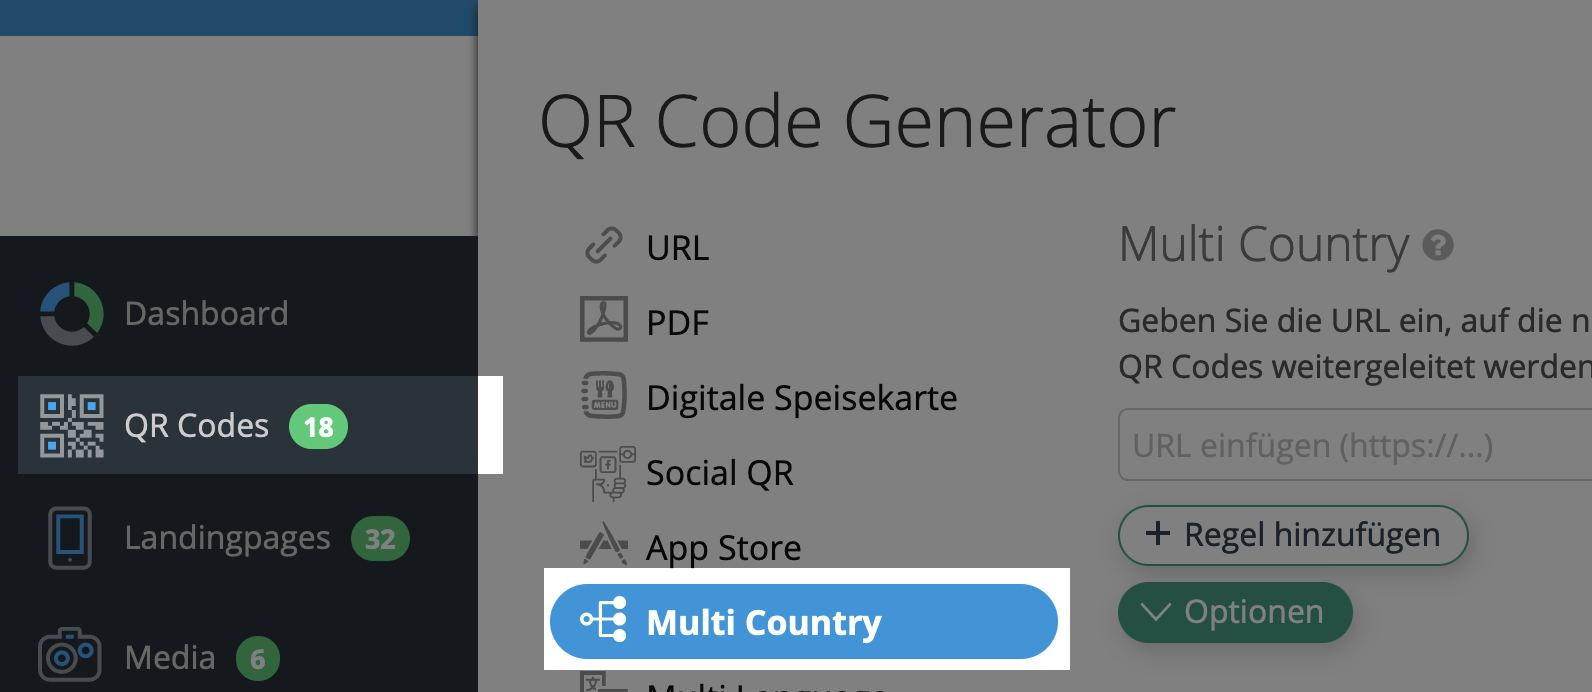 Multi-Country QR Code